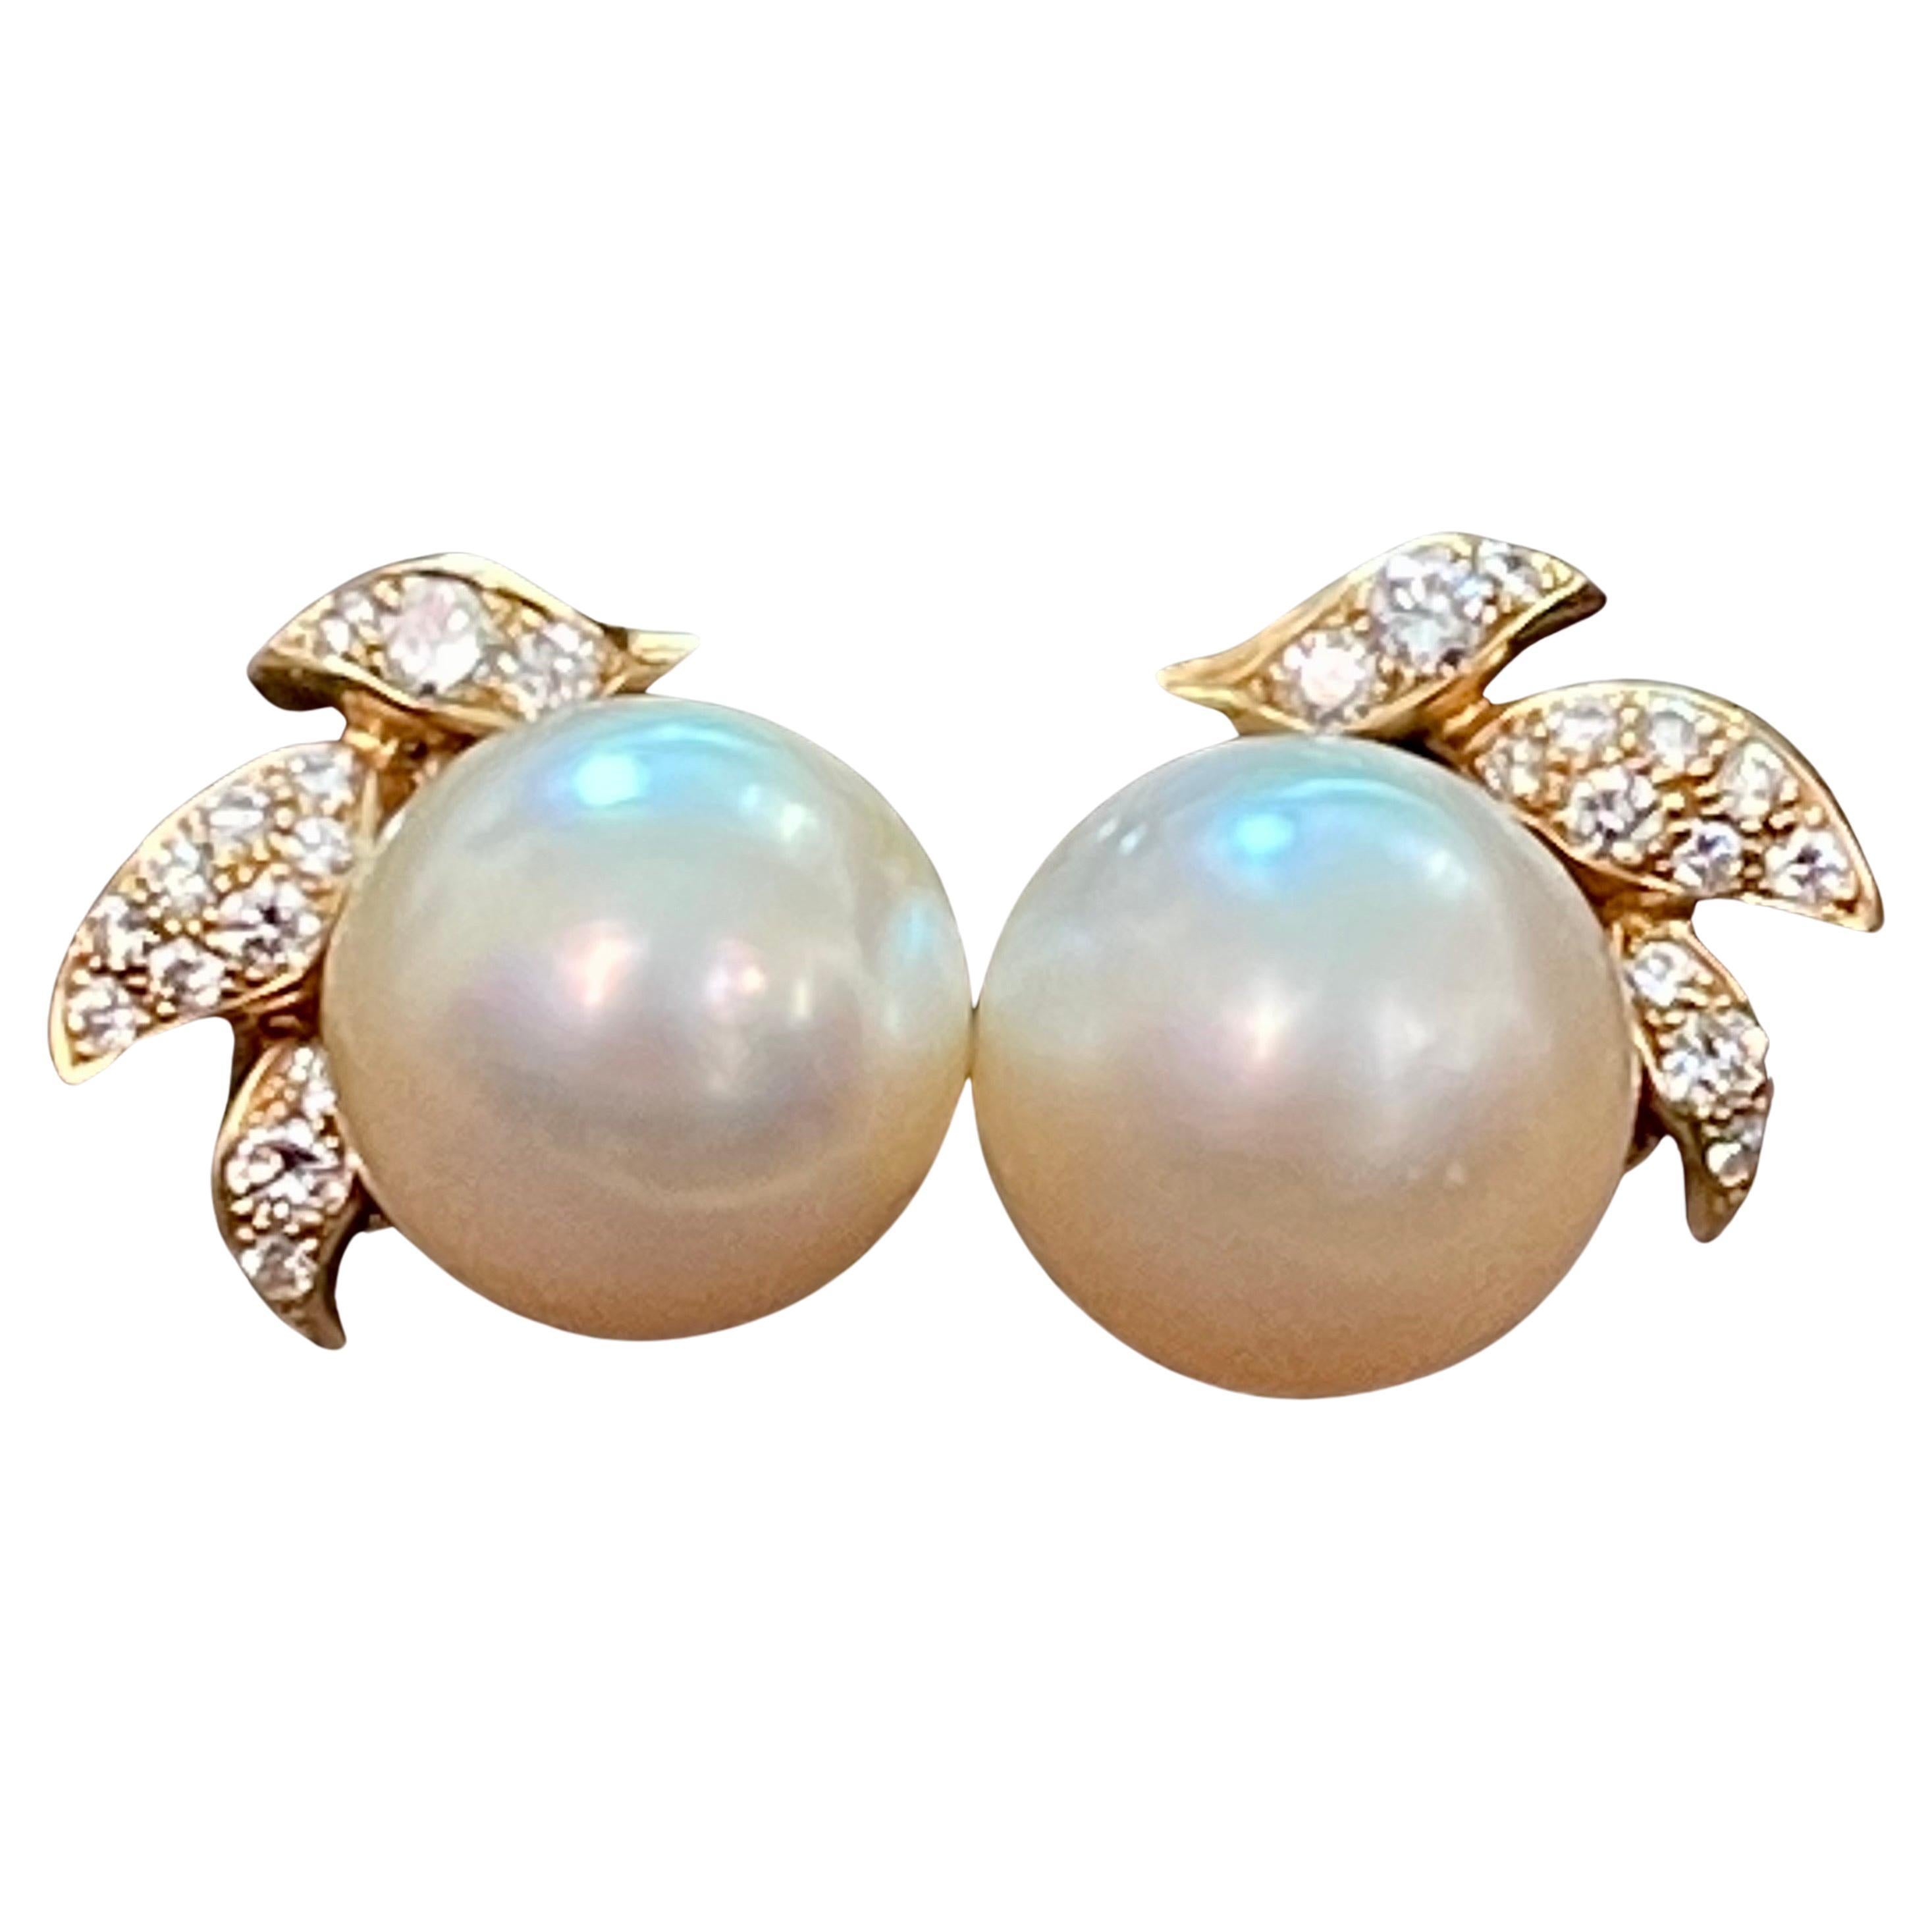 These are made and Signed  by designer Alexandria Reza 
14 MM  Round Designer A.Reza's Cream South Sea Pearl & Dimond Stud Earrings 18 K Yellow Gold Clip Earrings
 pearls are  clean but have some blemishes .
Light golden or Cream in color
Three